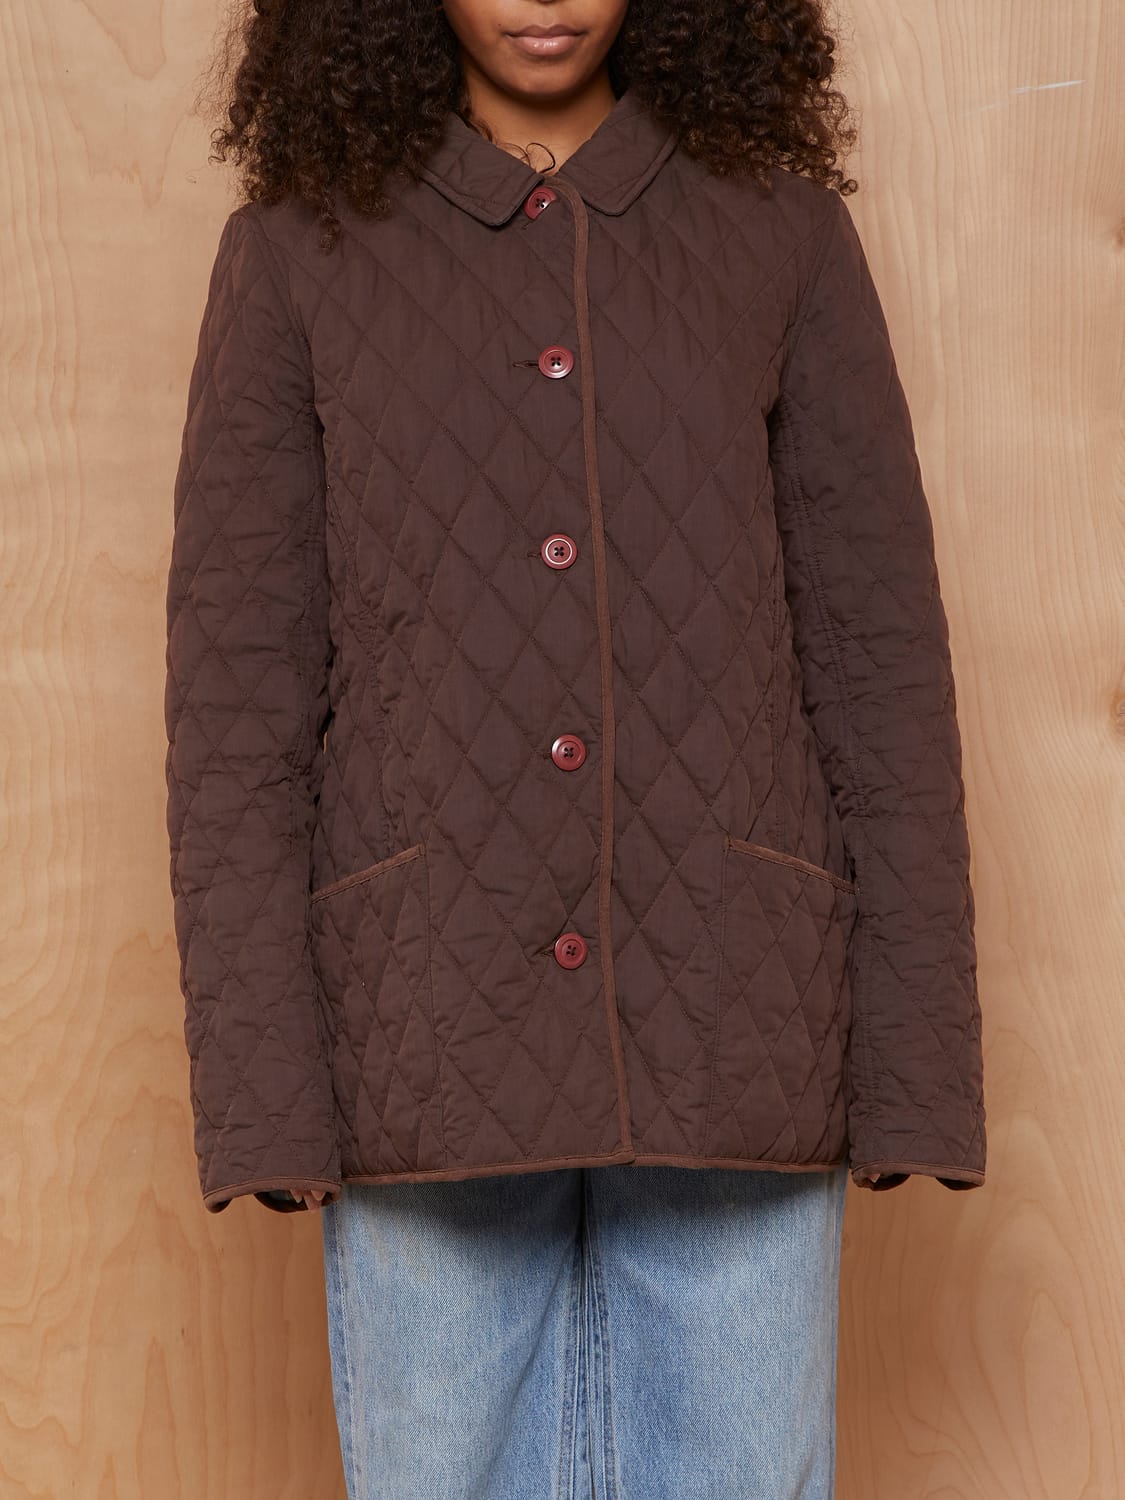 L.L. Bean Quilted Jacket